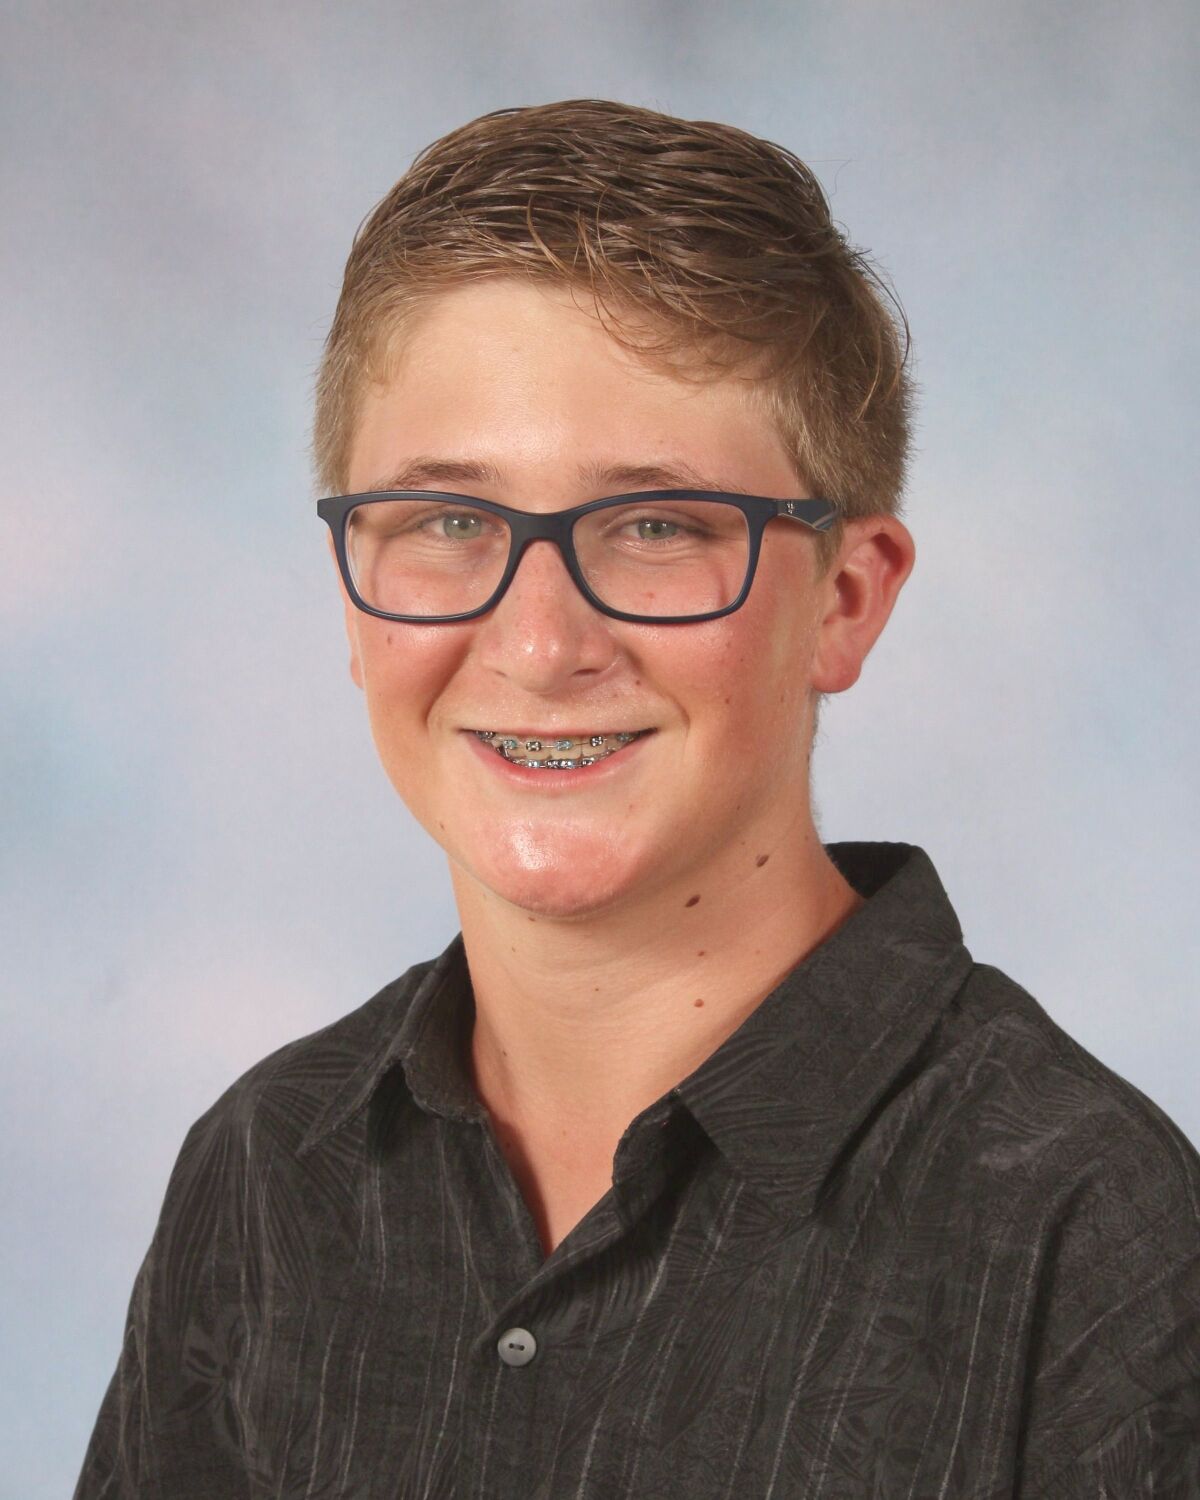 John Kuhn, a November Student Standout at Olive Peirce Middle School